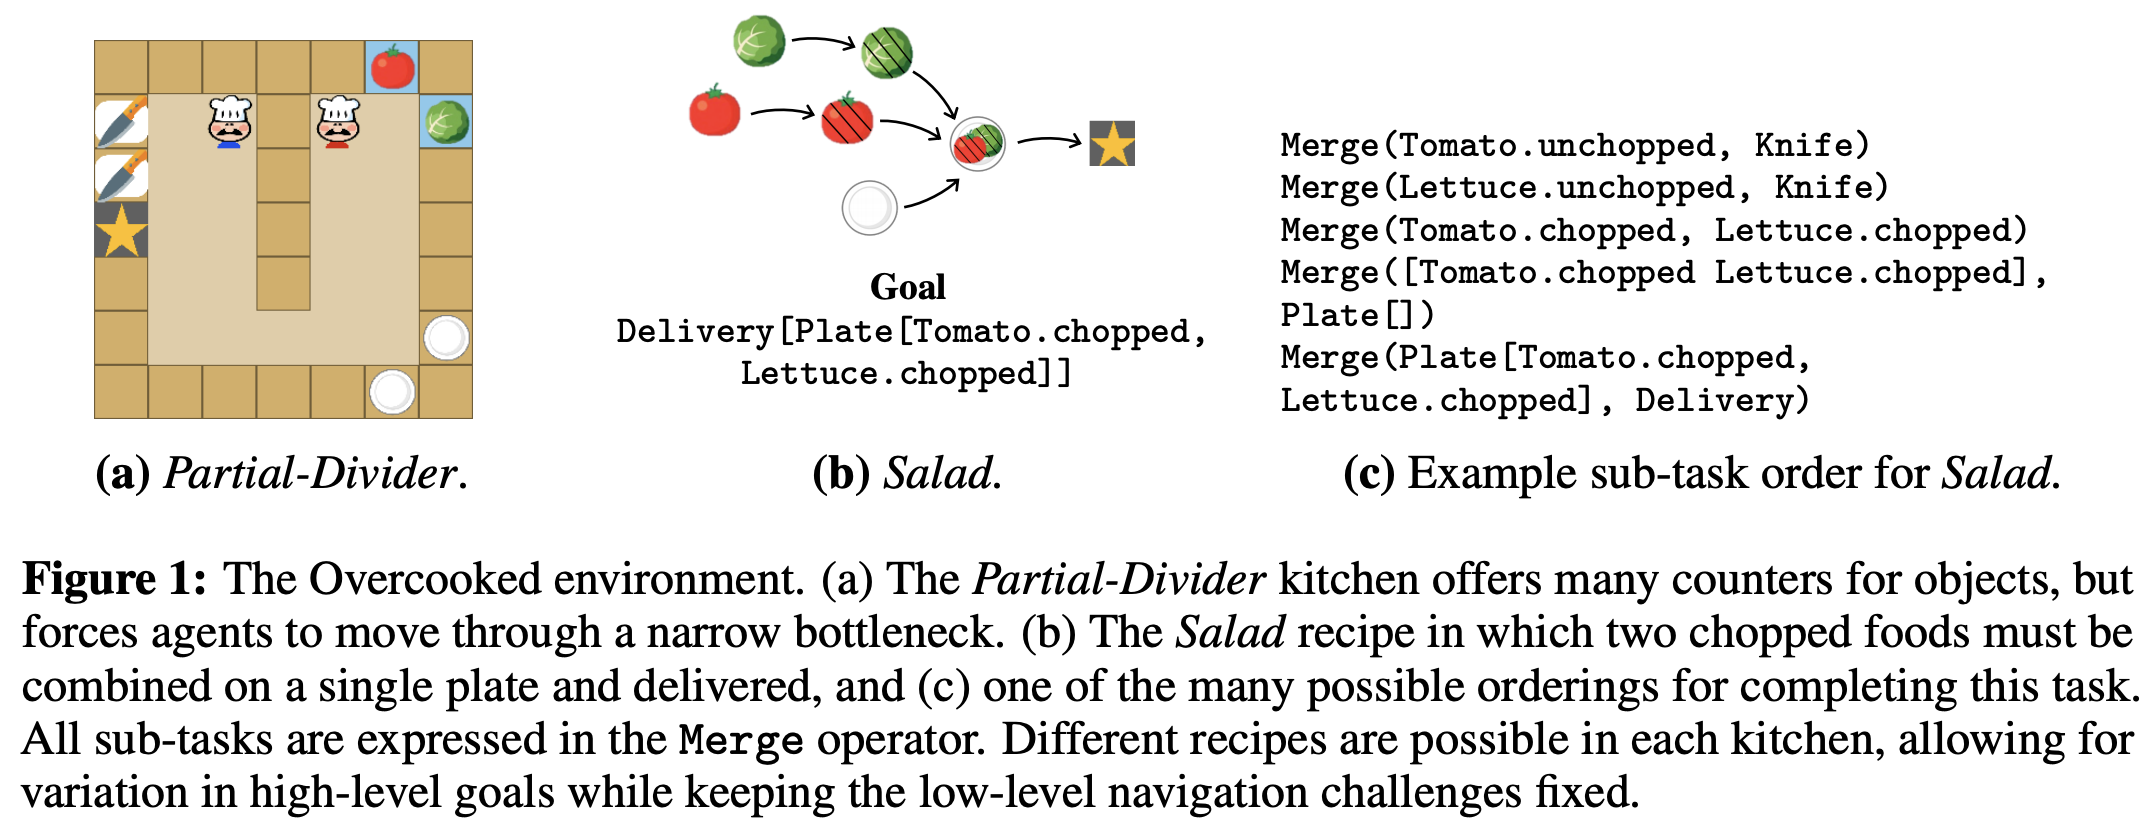 The Overcooked environment and the sub-tasks to deliver a salad.
[